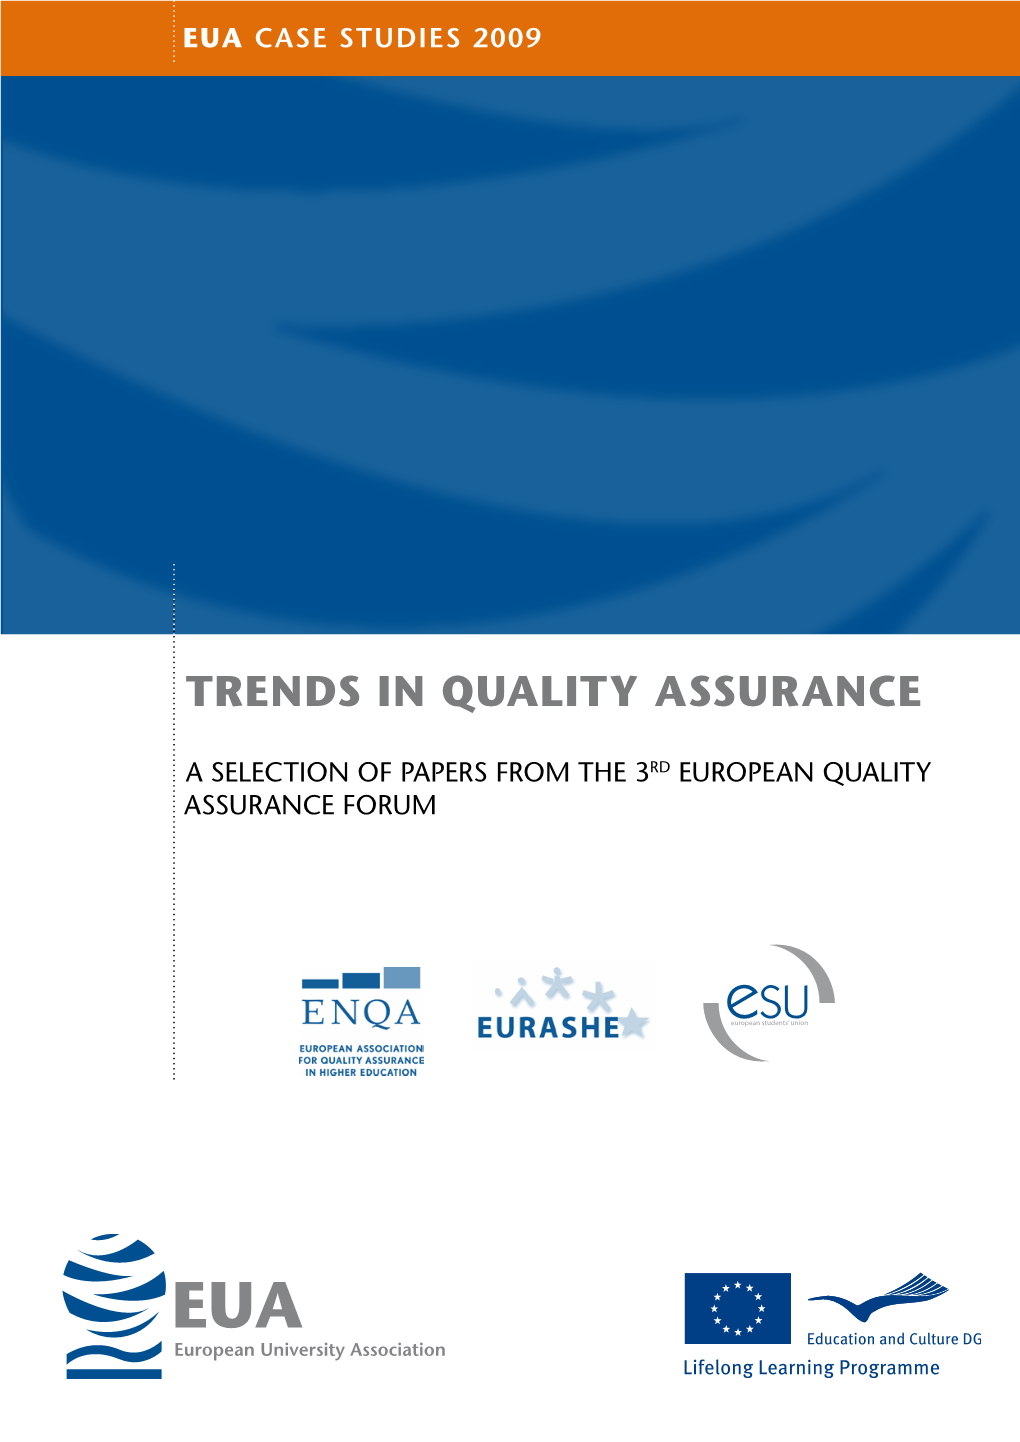 Trends in Quality Assurance